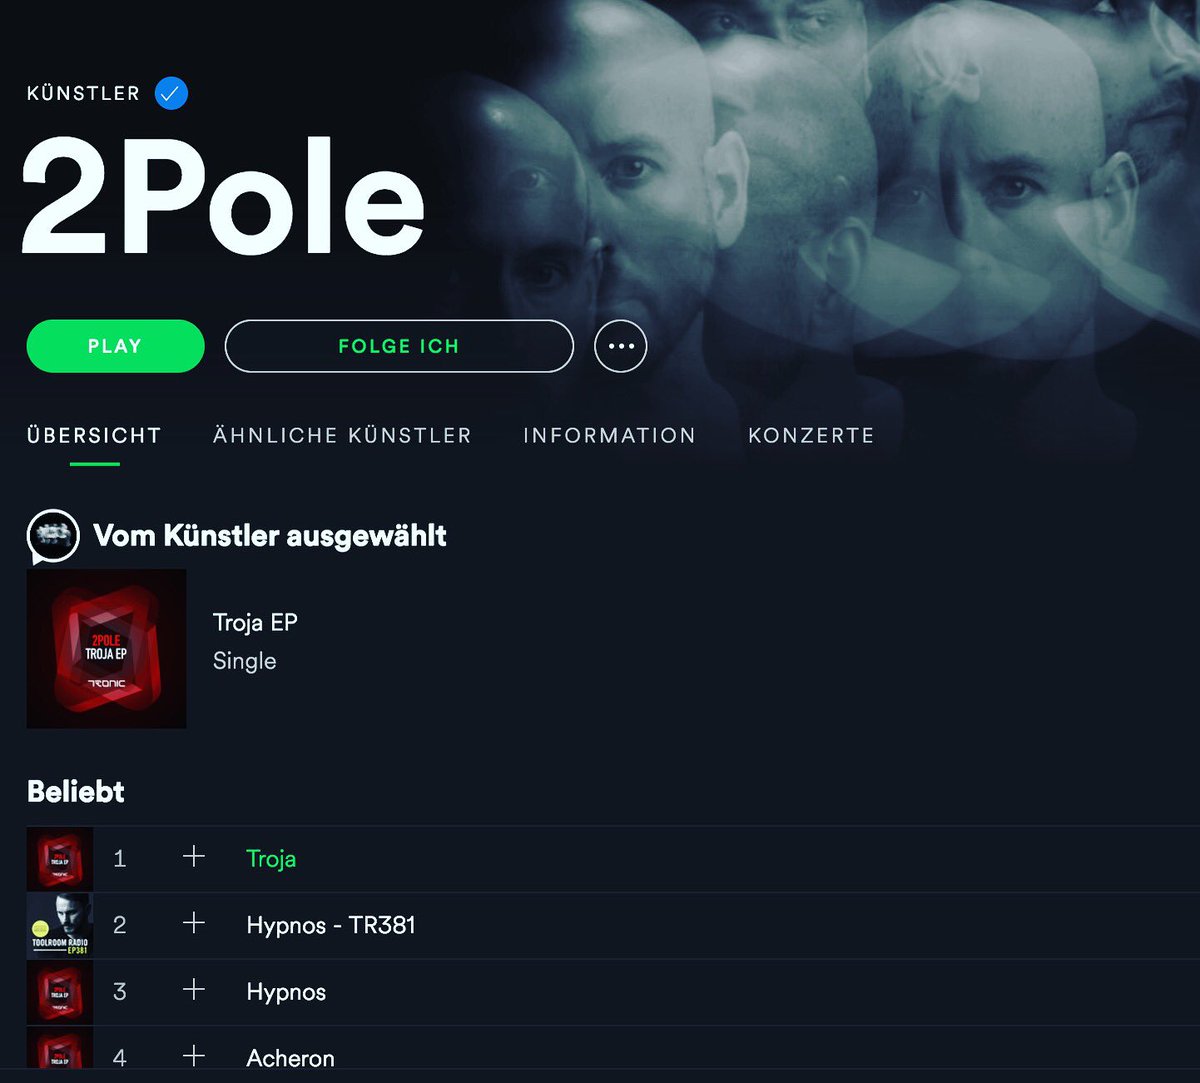 check our #September @spotify playlist - #techno that we like!

#2pole #spotify #playlist #weekend #foryourearsonly